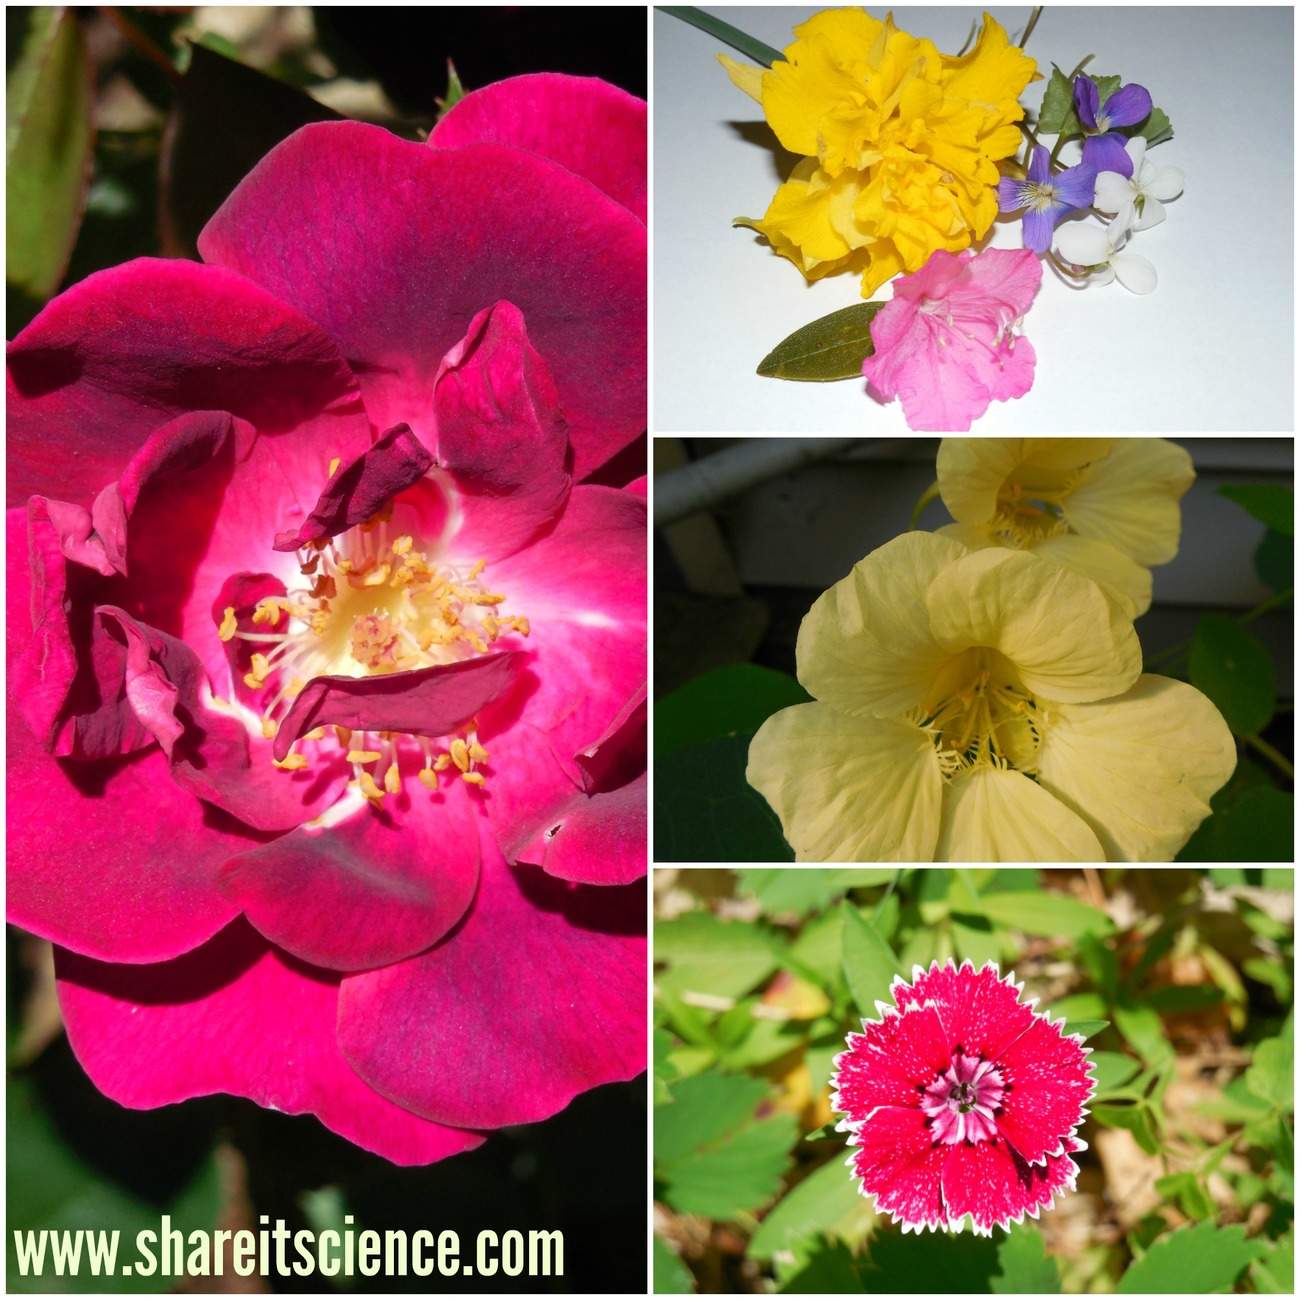 shareitscience_diversity-in-flowers (1)